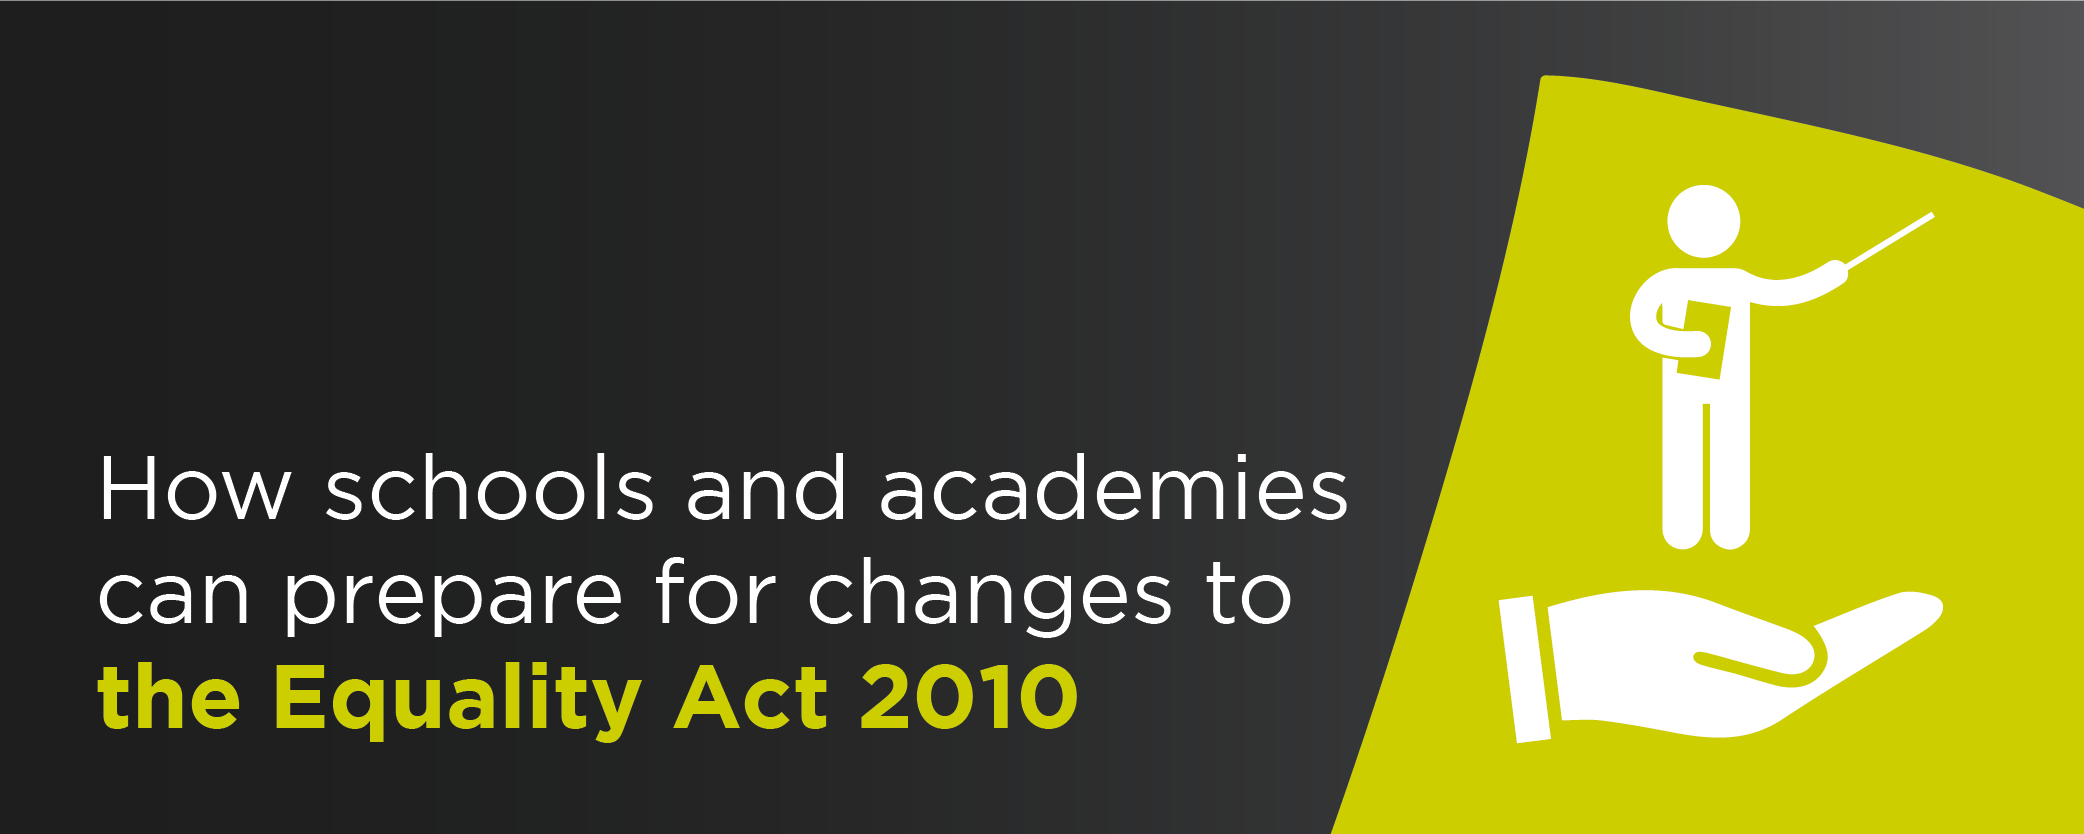 How schools and academies can prepare for changes to the Equality Act 2010